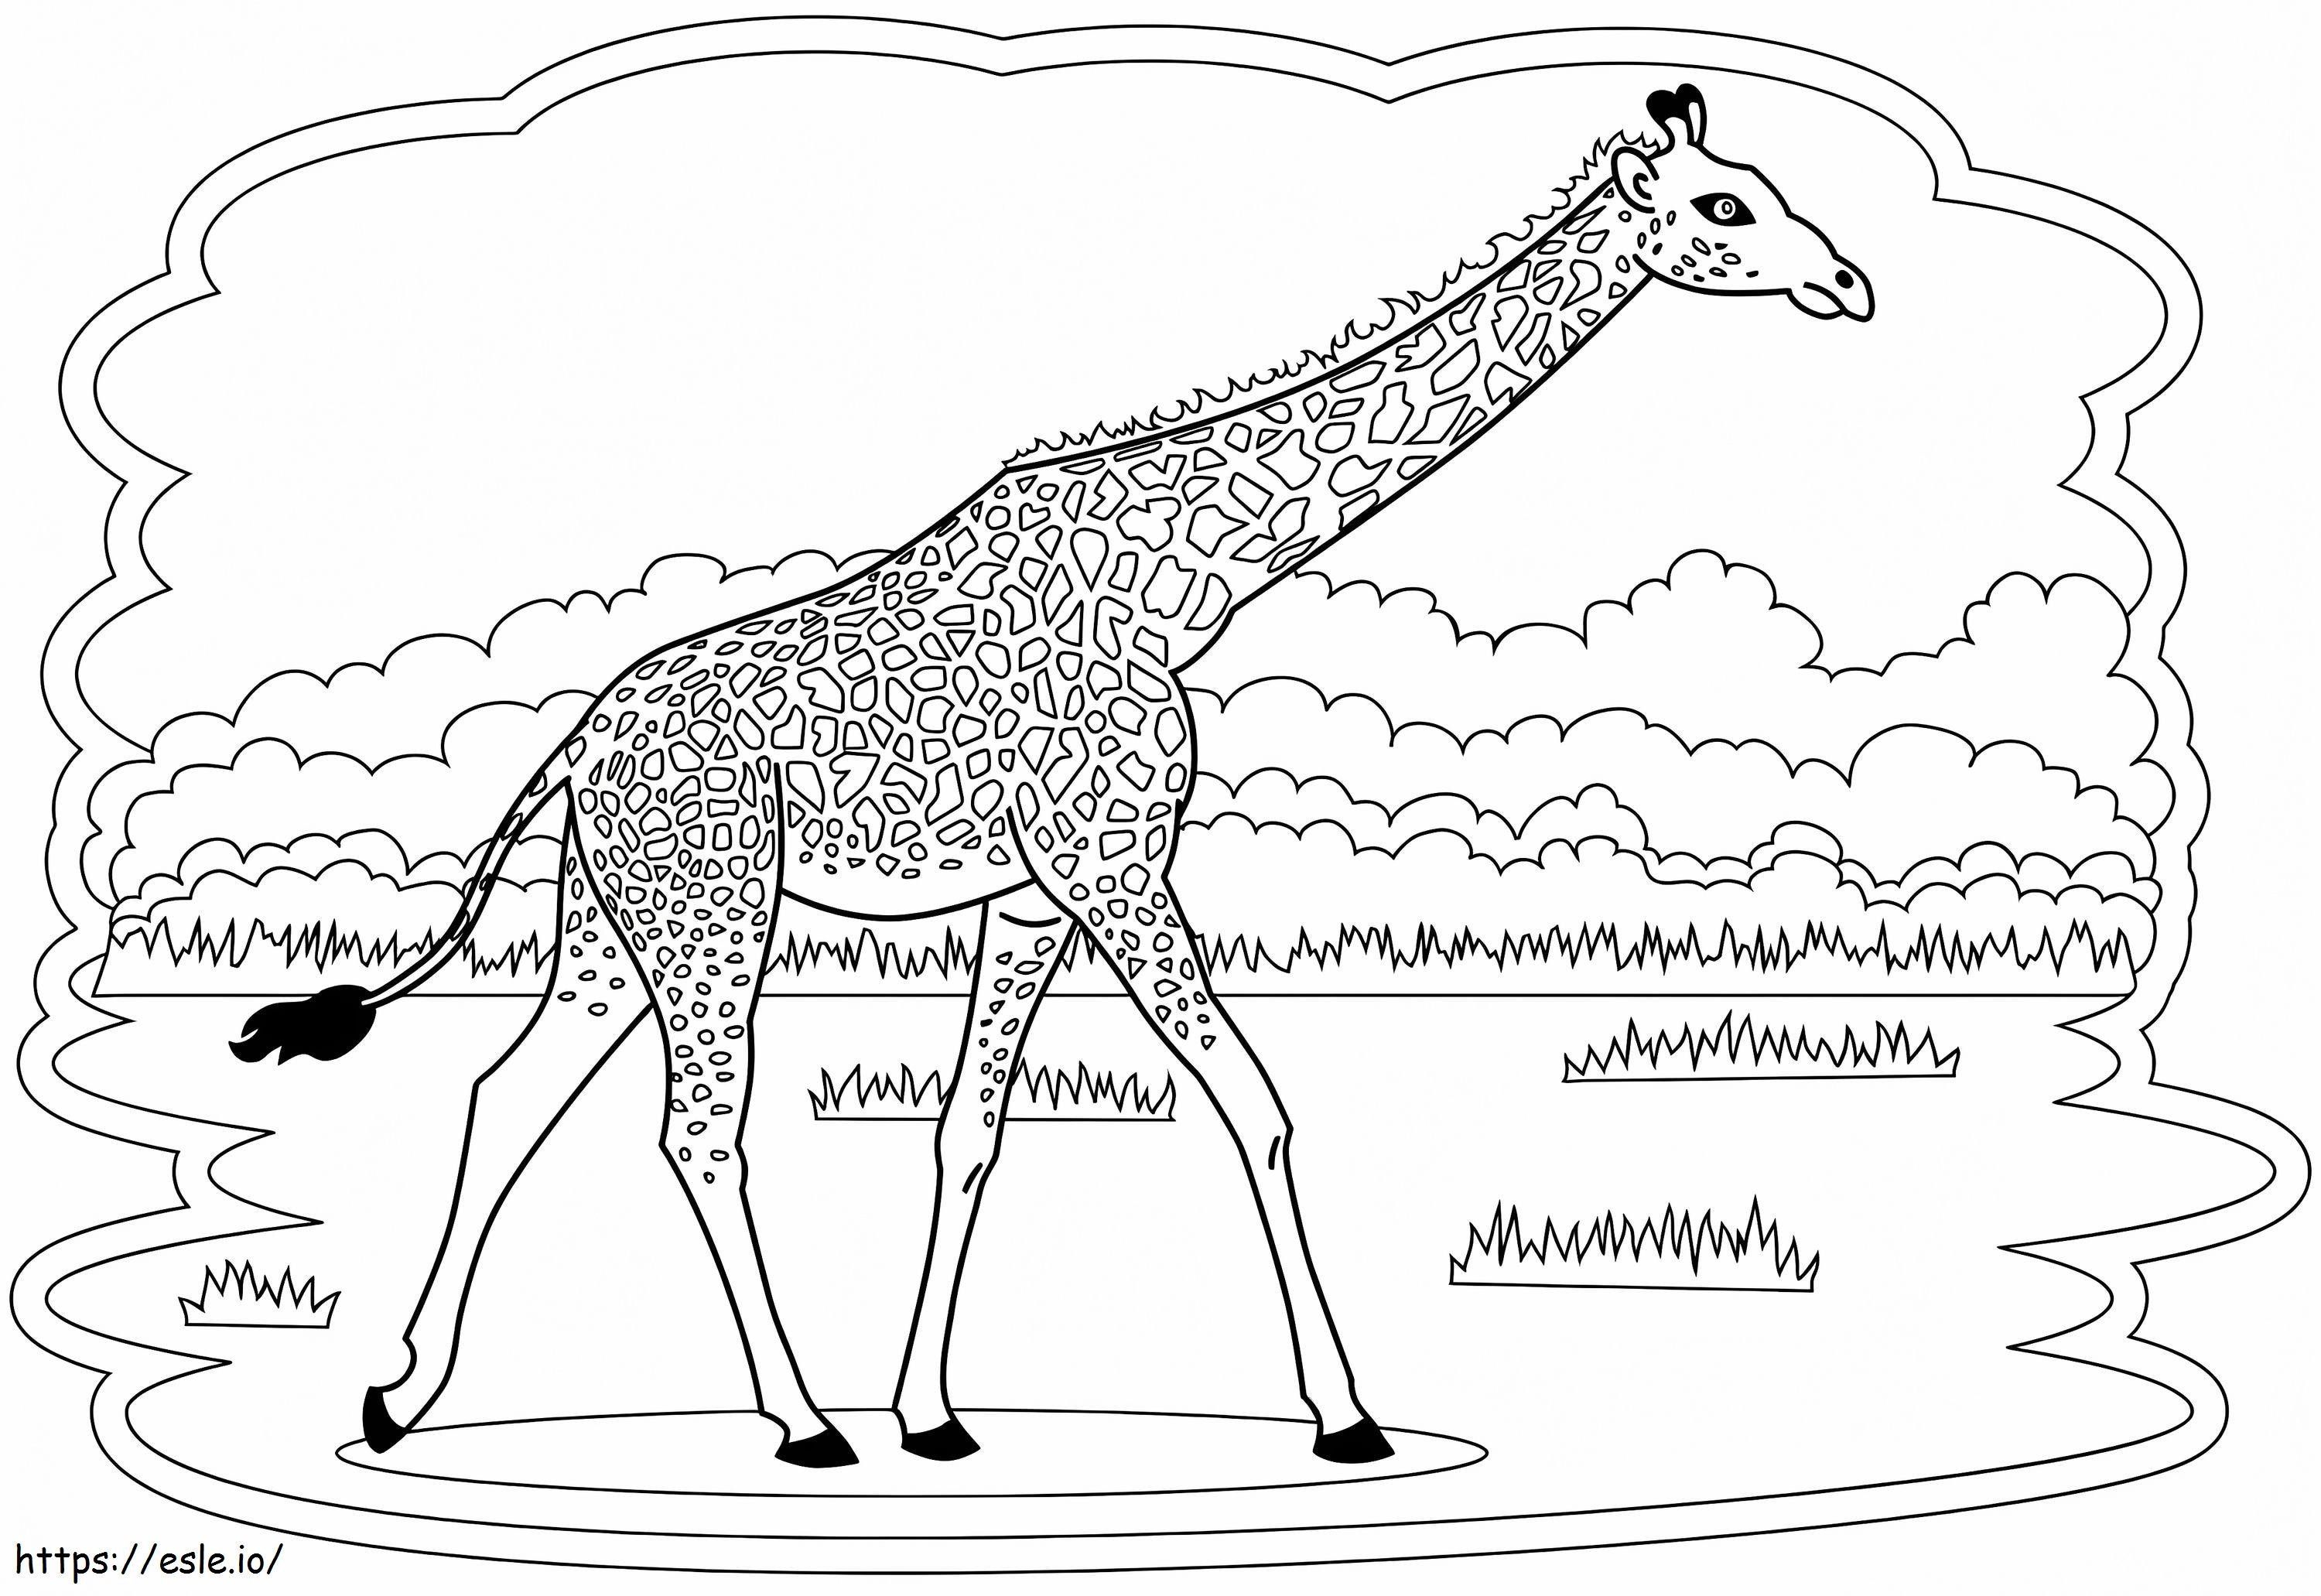 Giraffe For Children coloring page